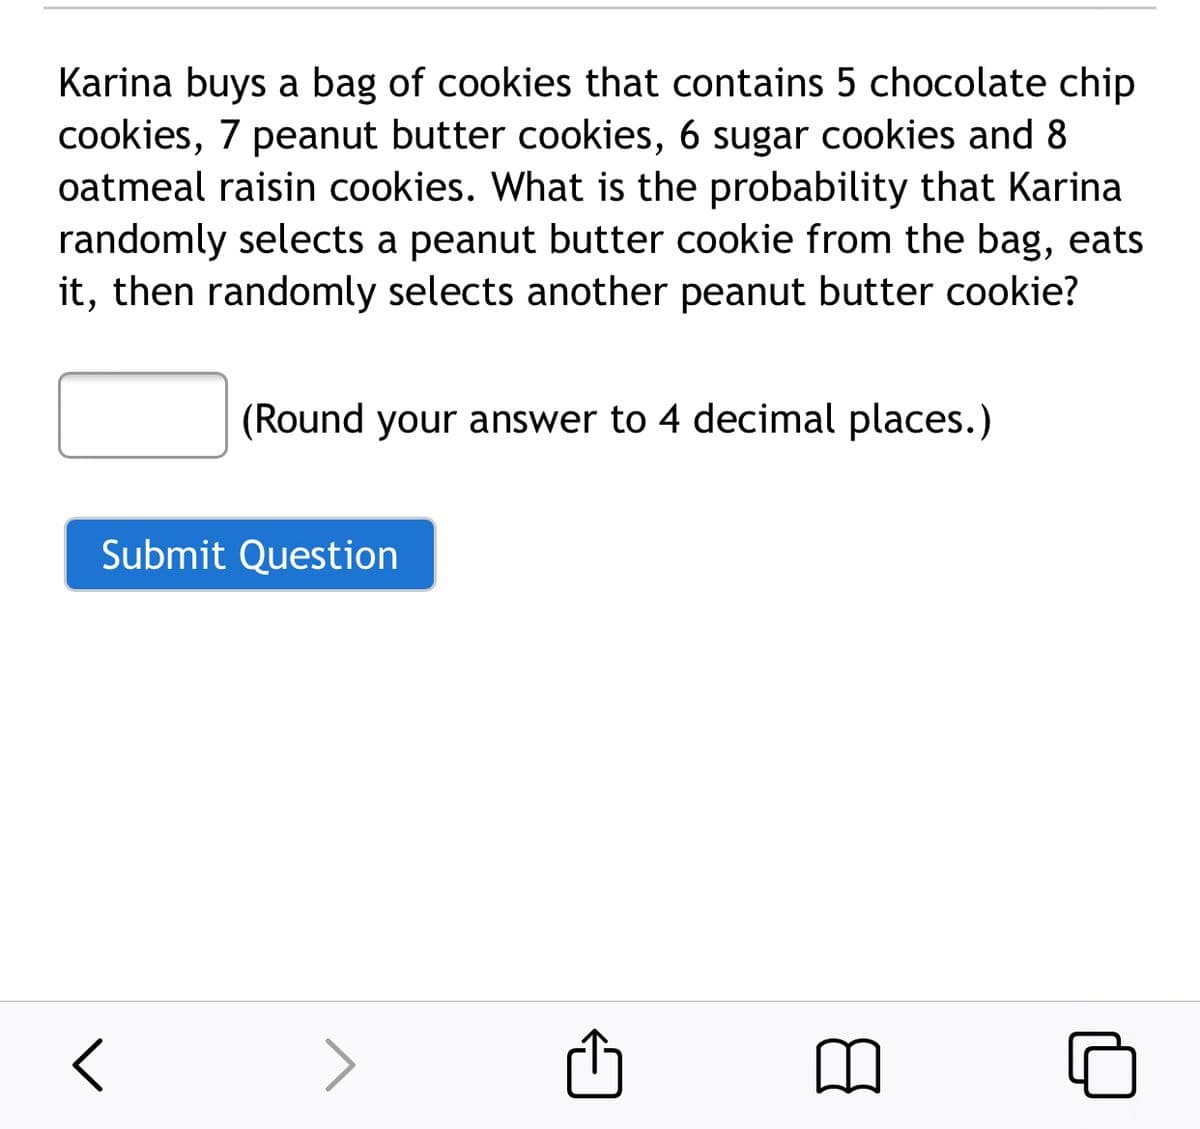 Karina buys a bag of cookies that contains 5 chocolate chip
cookies, 7 peanut butter cookies, 6 sugar cookies and 8
oatmeal raisin cookies. What is the probability that Karina
randomly selects a peanut butter cookie from the bag, eats
it, then randomly selects another peanut butter cookie?
(Round your answer to 4 decimal places.)
Submit Question
>
